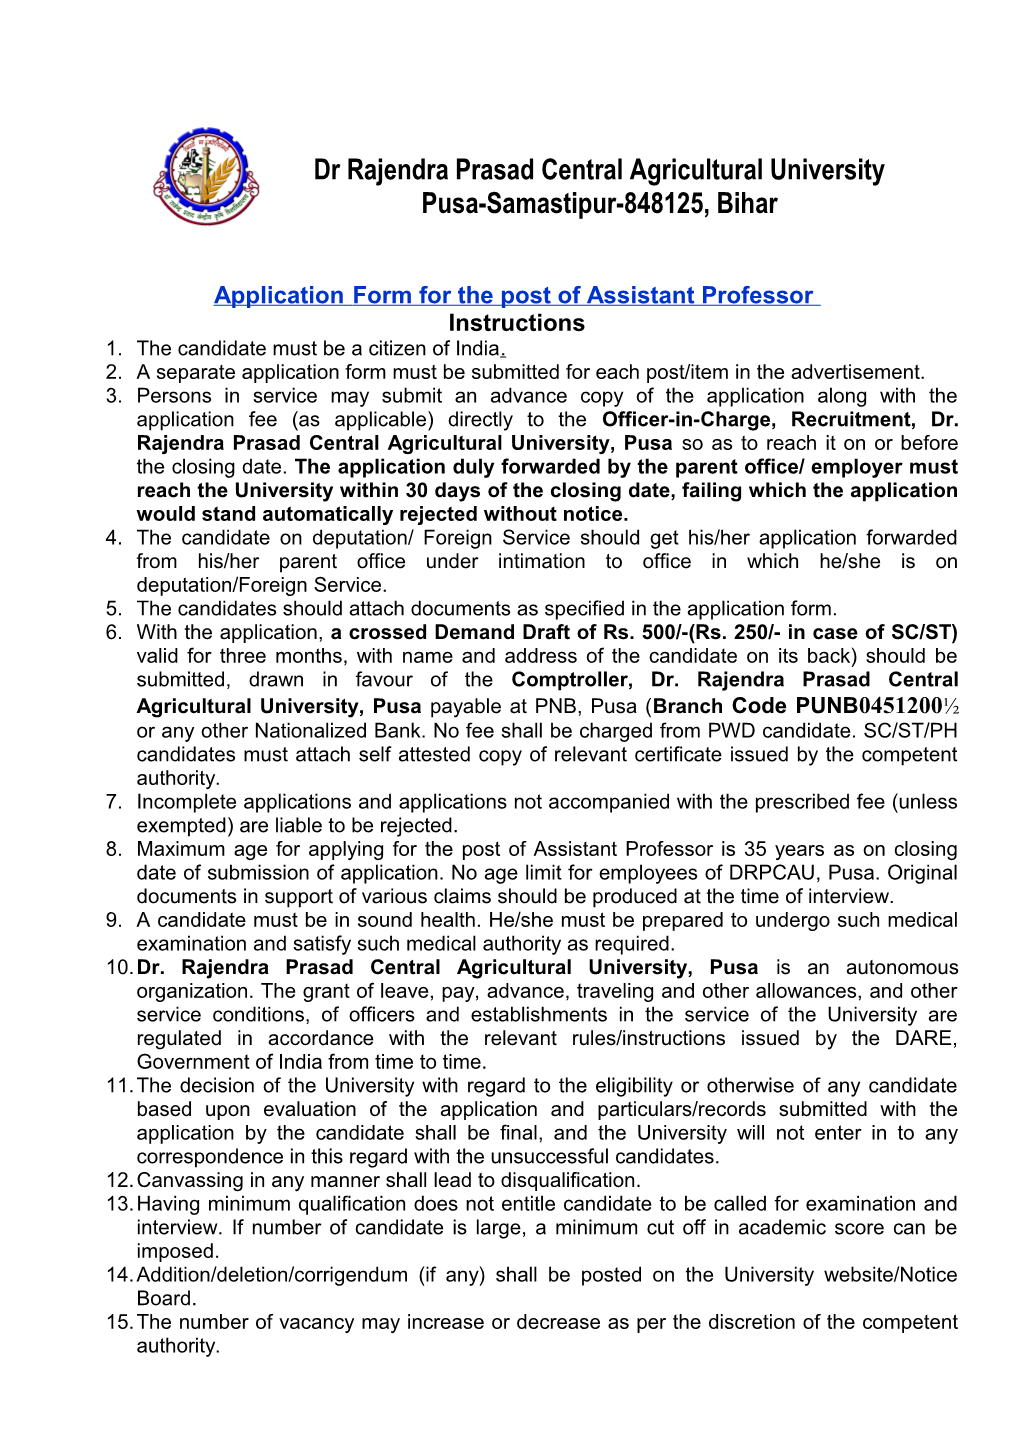 Applicationform for the Post of Assistant Professor